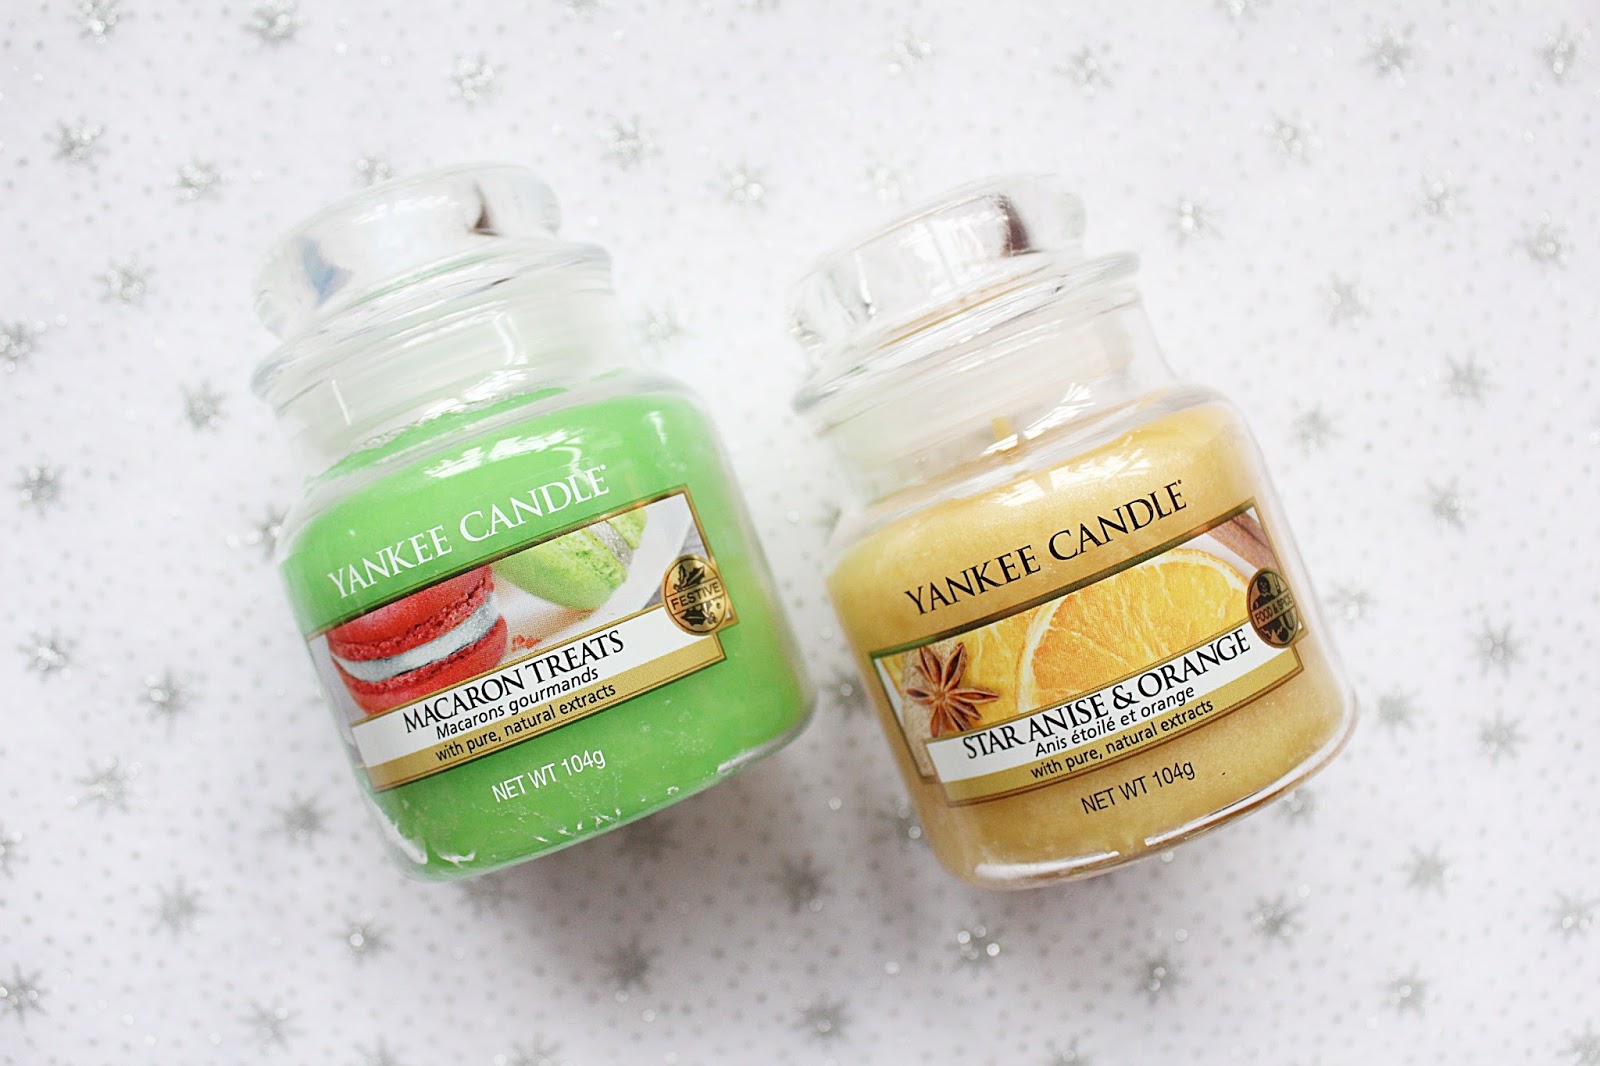 Yankee Candle Christmas Candles 2016 